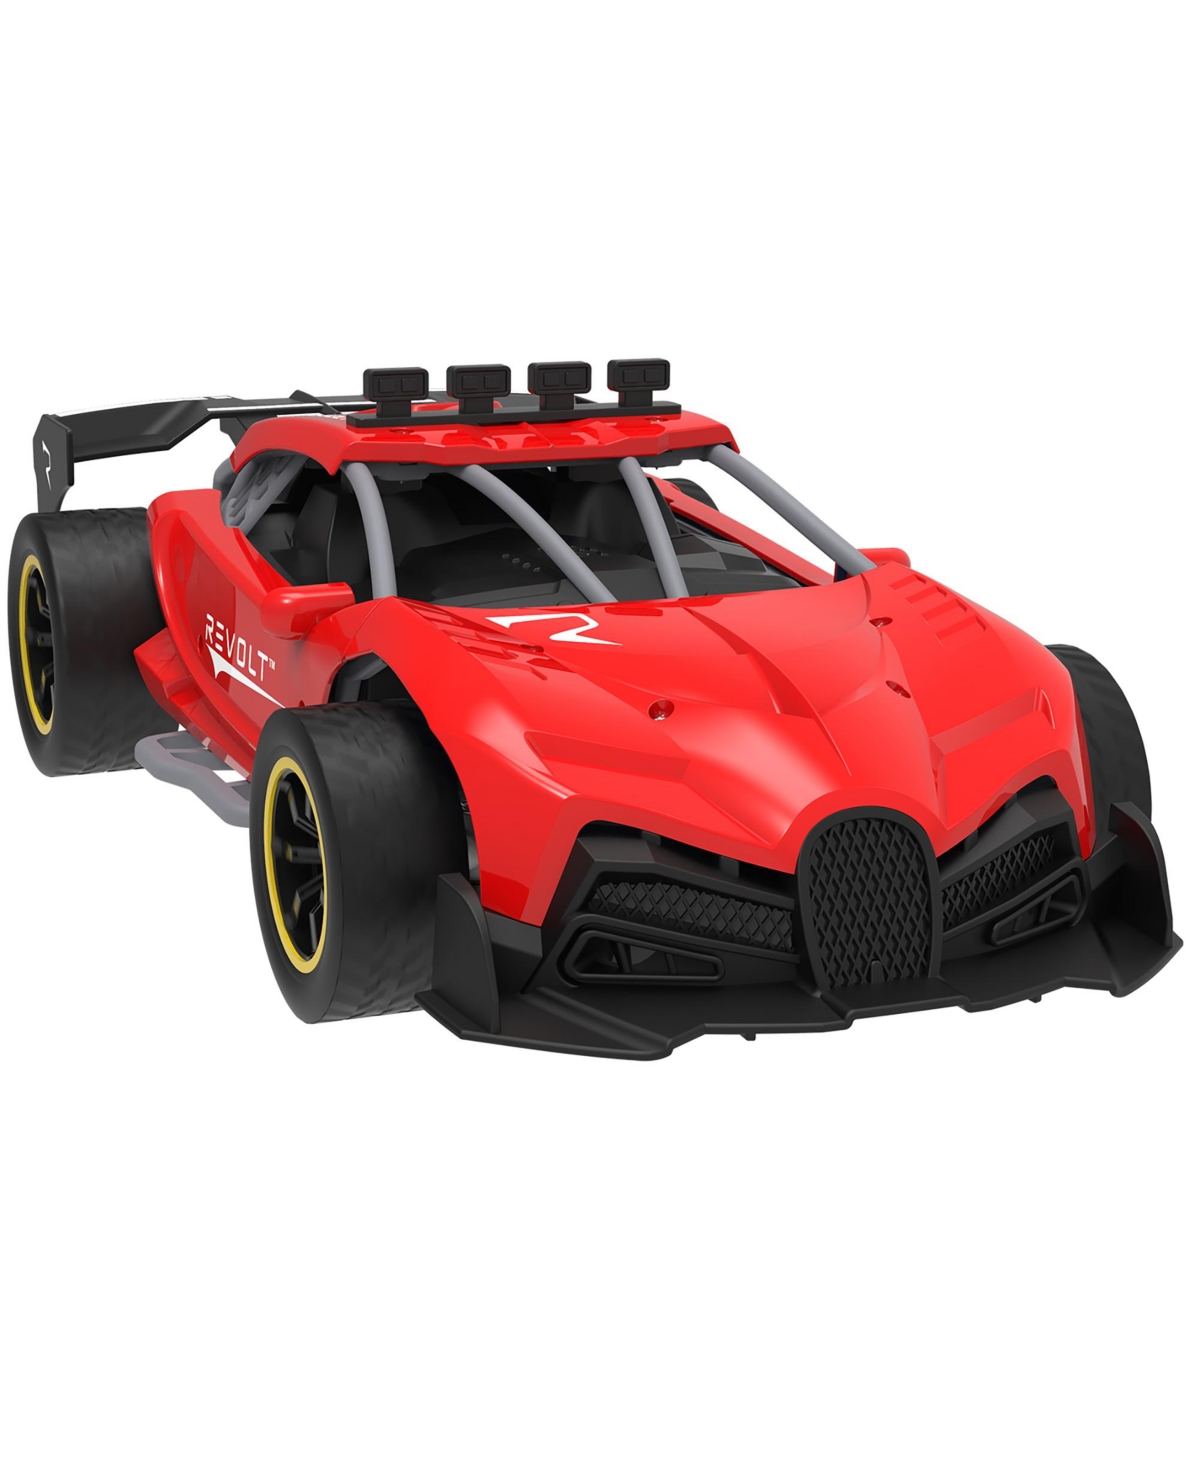 Revolution By Revolt Revolt Vapor Racers Tg1008 Realistic Effects Simply Add Water In Multi